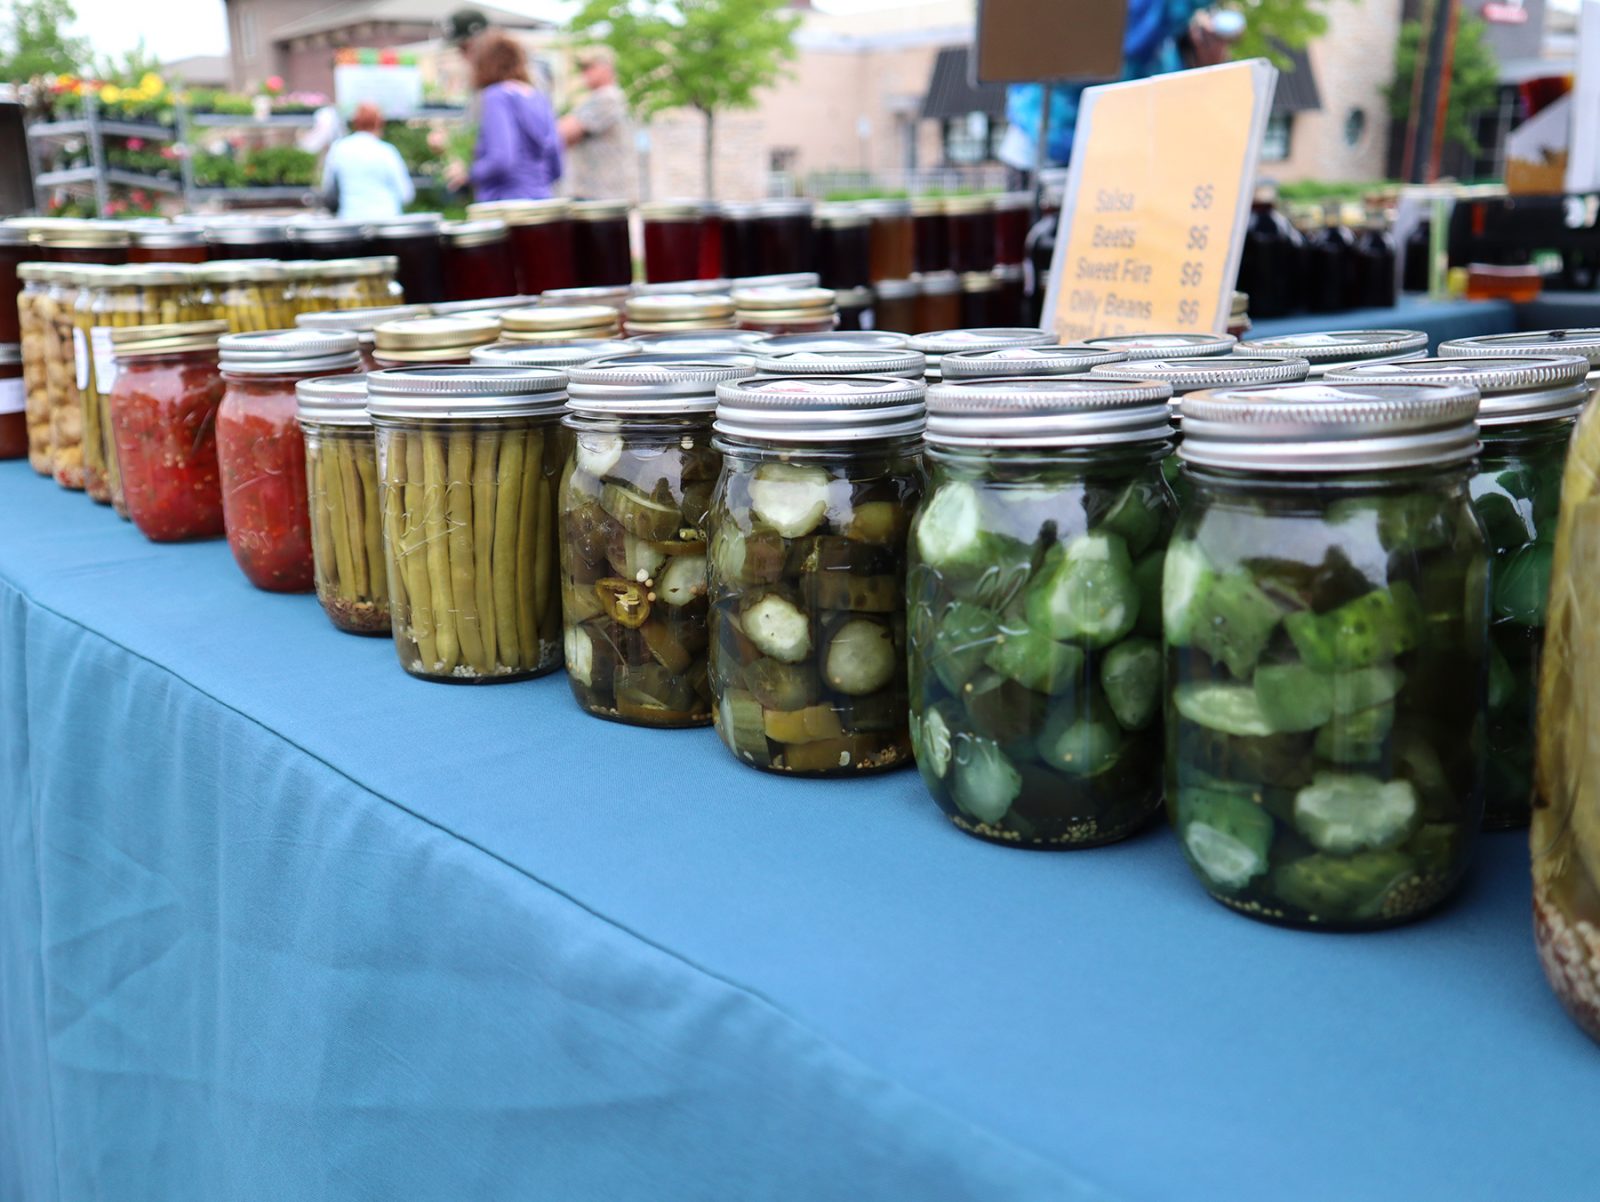 a row of jars filled with pickles on top of a blue table.